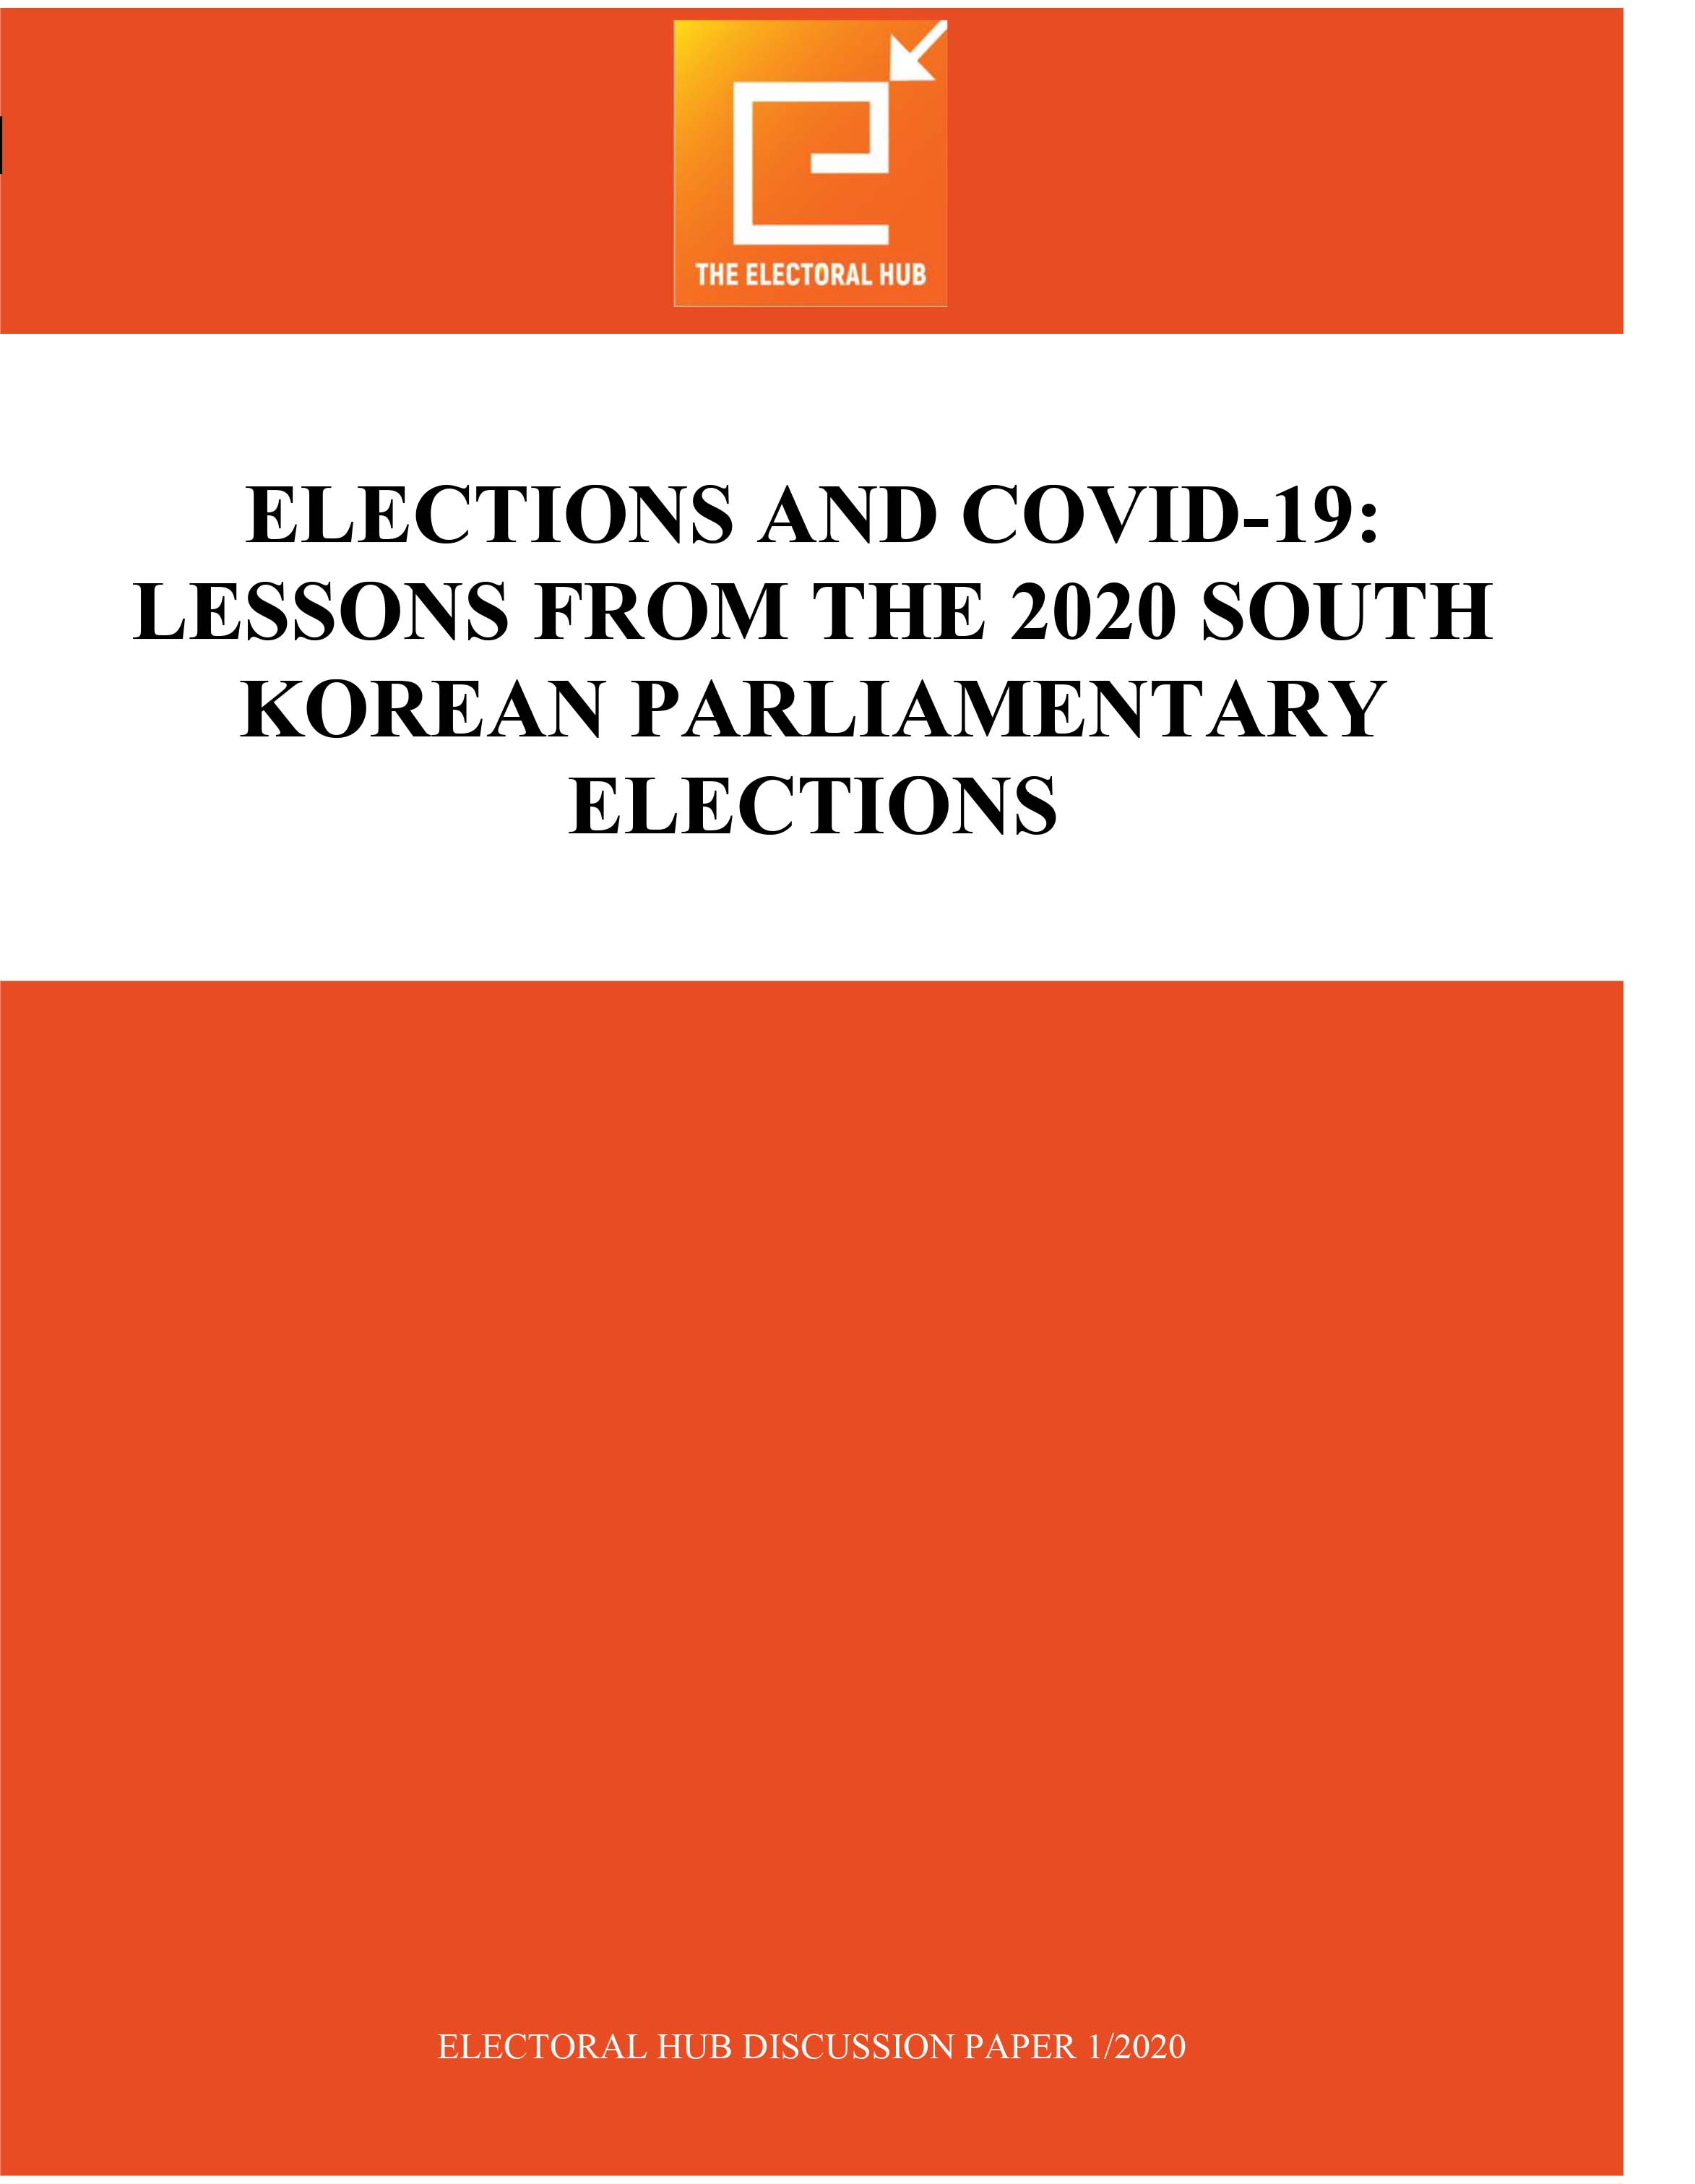 Elections and Covid-19: Lessons from the 2020 South Korean Parliamentary Elections